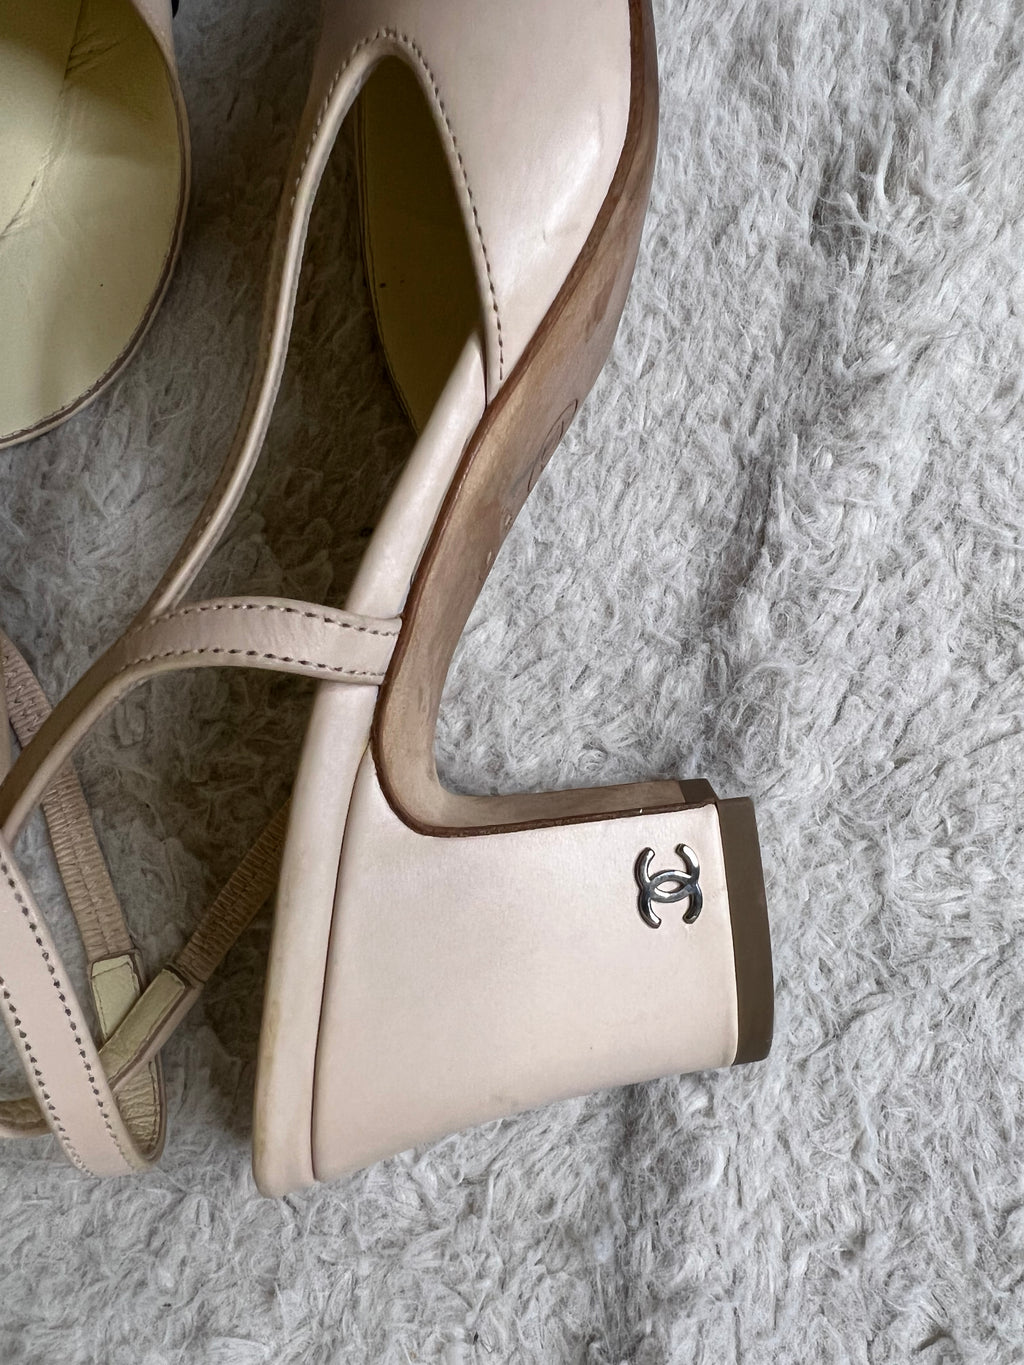 Chanel Strappy Heels at Secondi Consignment